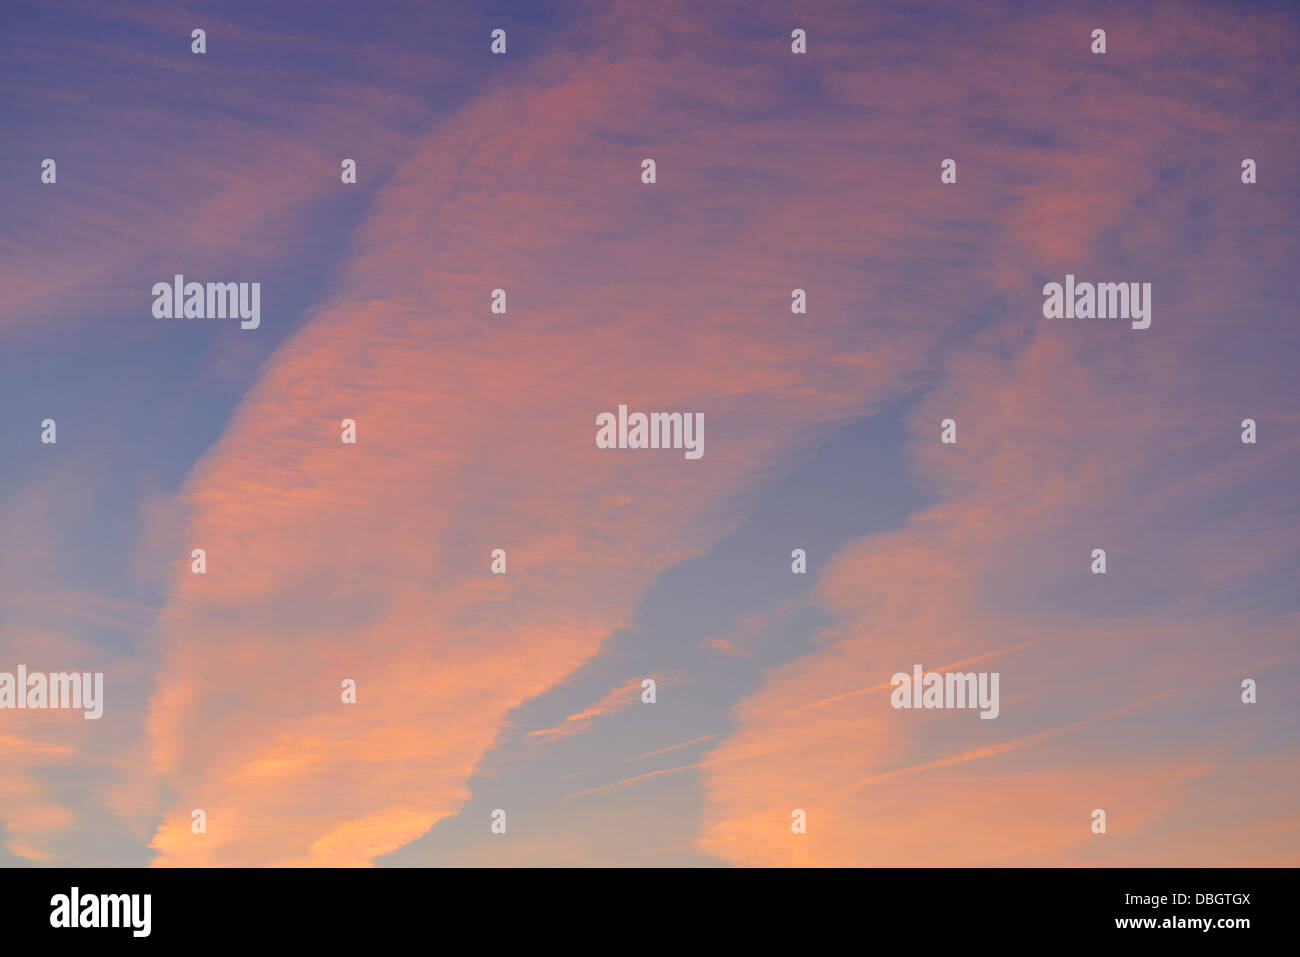 Clouds in a red sunset sky Stock Photo